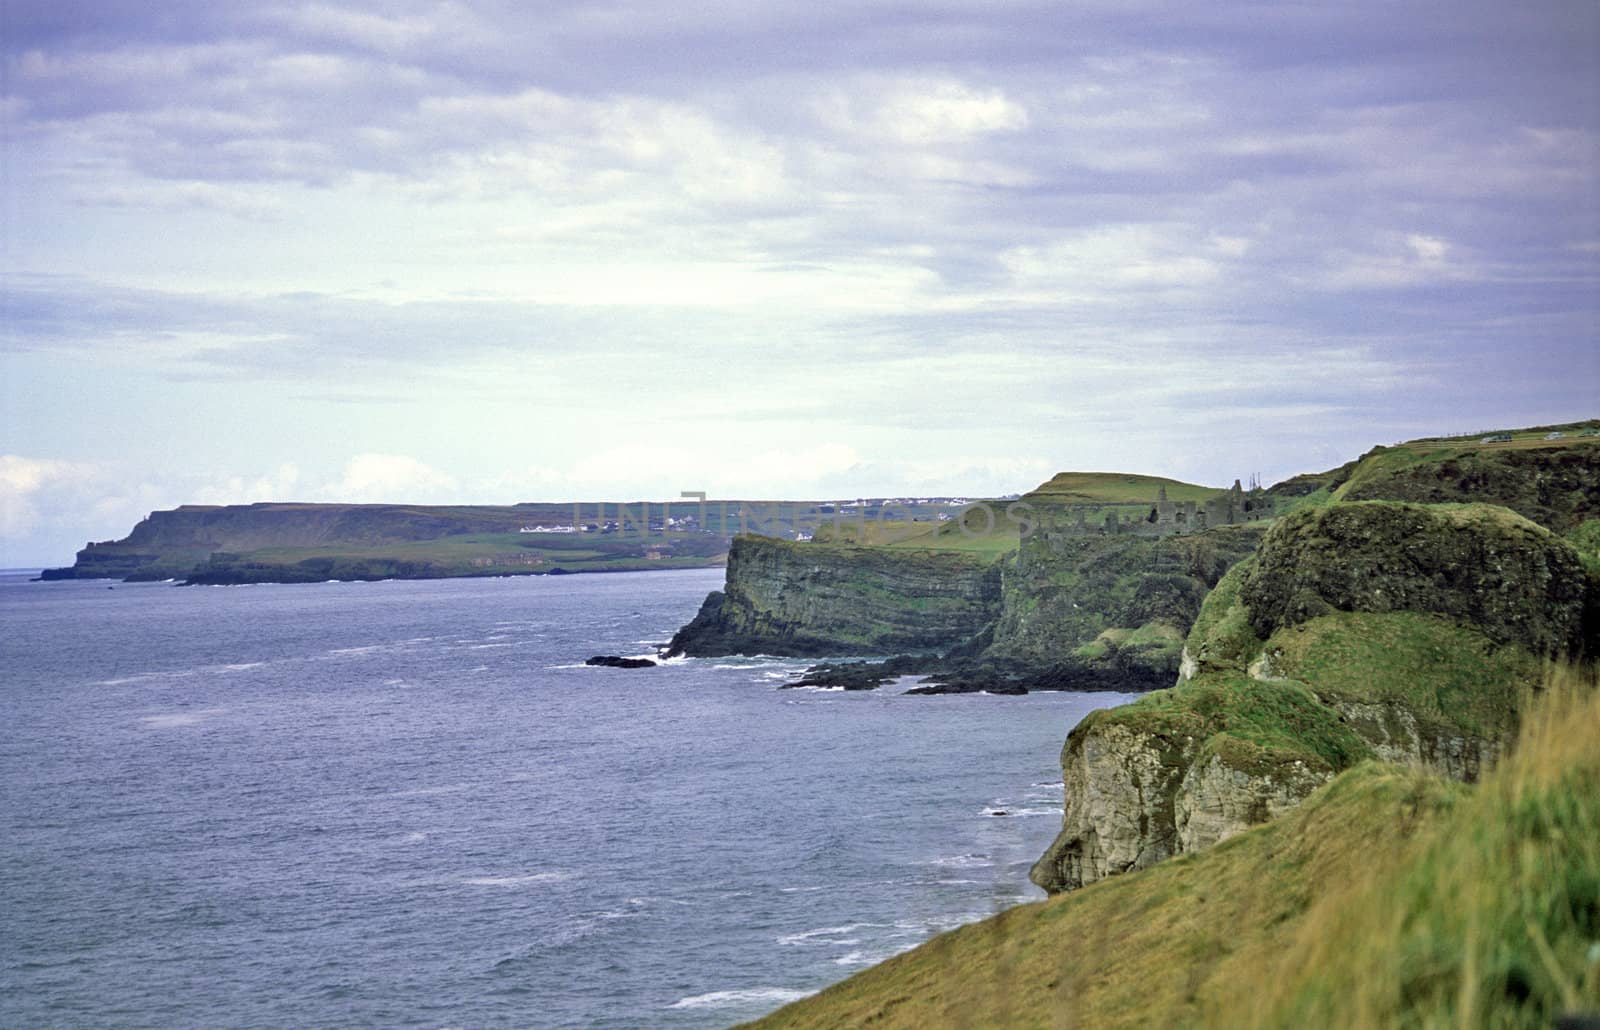 The ruins of Dunluce castle are visible on the cliffs of Northern Ireland's rocky coast.